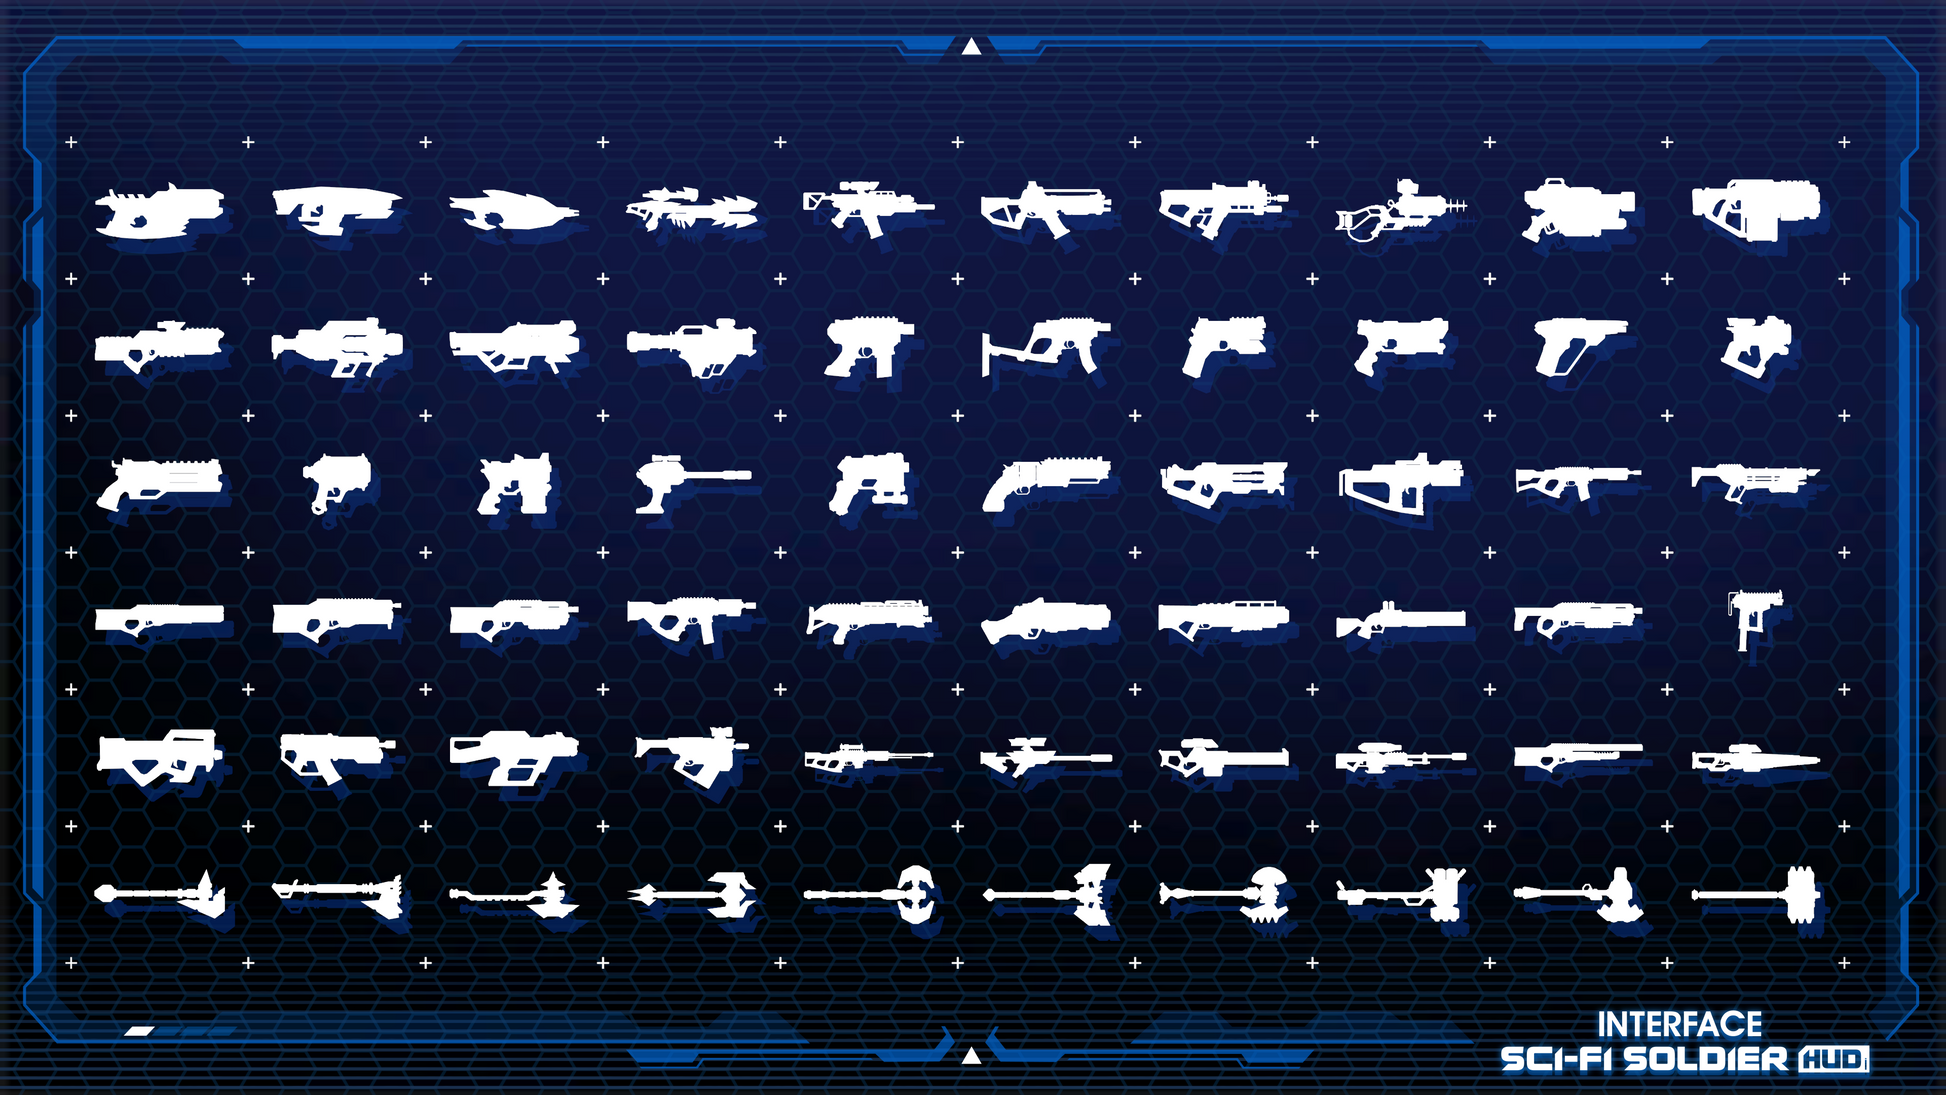 White menu icons for equiipment from the INTERFACE Sci-Fi Soldier HUD 3D game asset pack